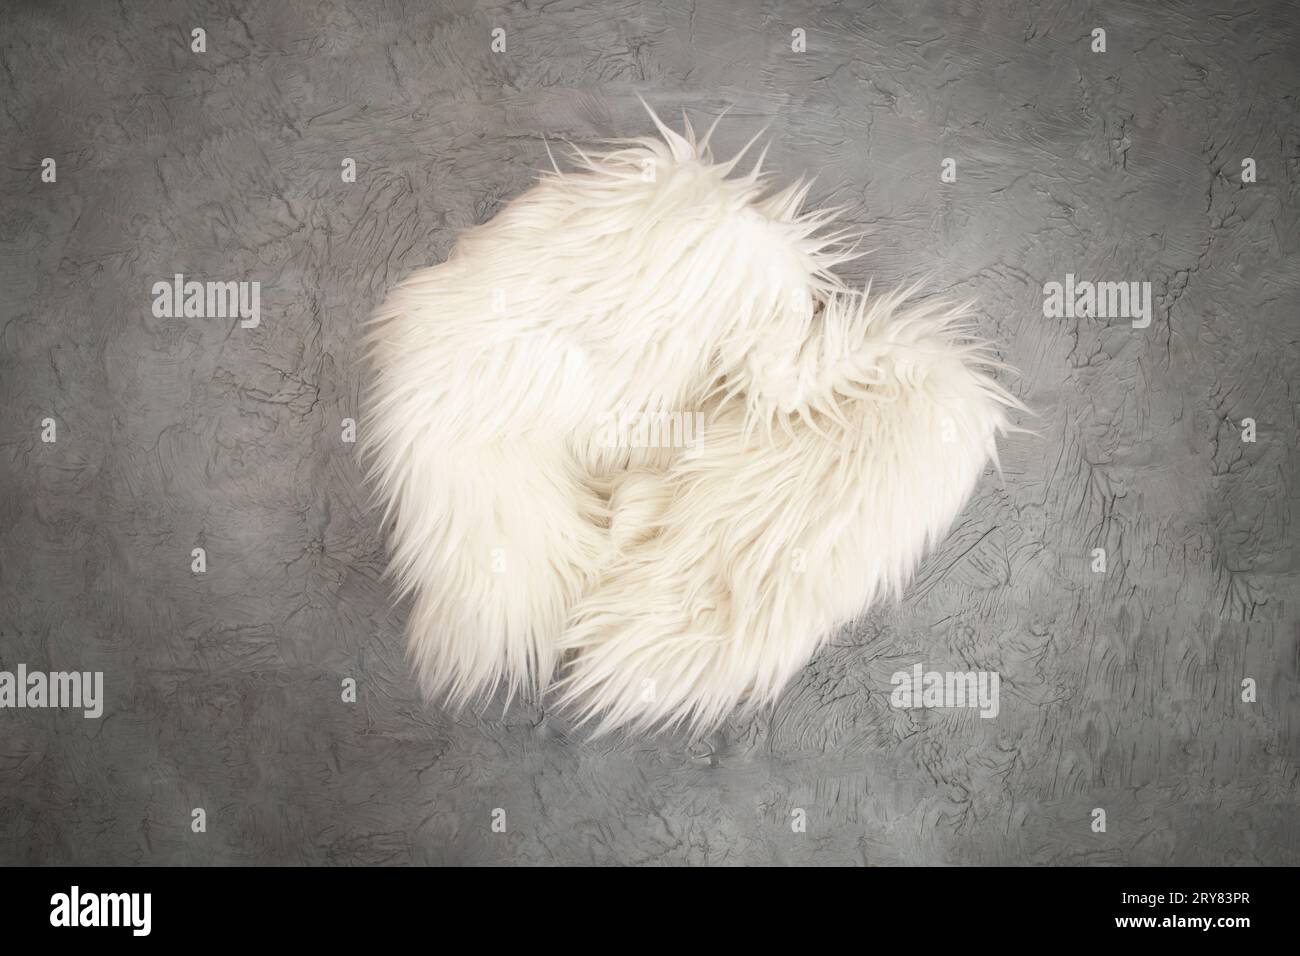 New born or baby portrait photography backdrop white fur,  cement texture, flat lay Stock Photo